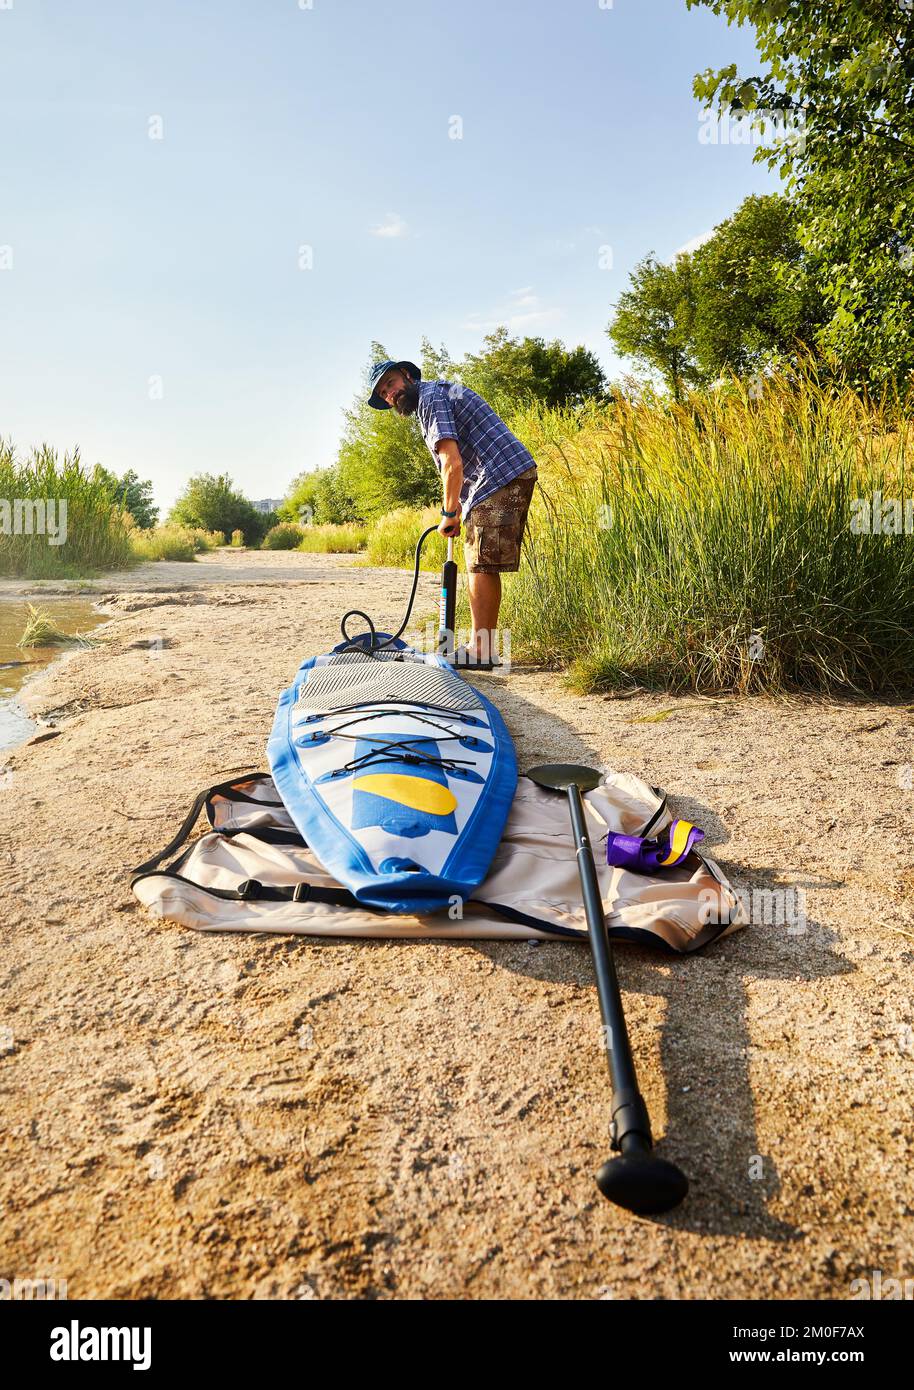 Man pumpt Stand-Up-Paddle-Boards SUP am Strand des Sees Sairan in der Stadt Almaty in Kasachstan. Stockfoto